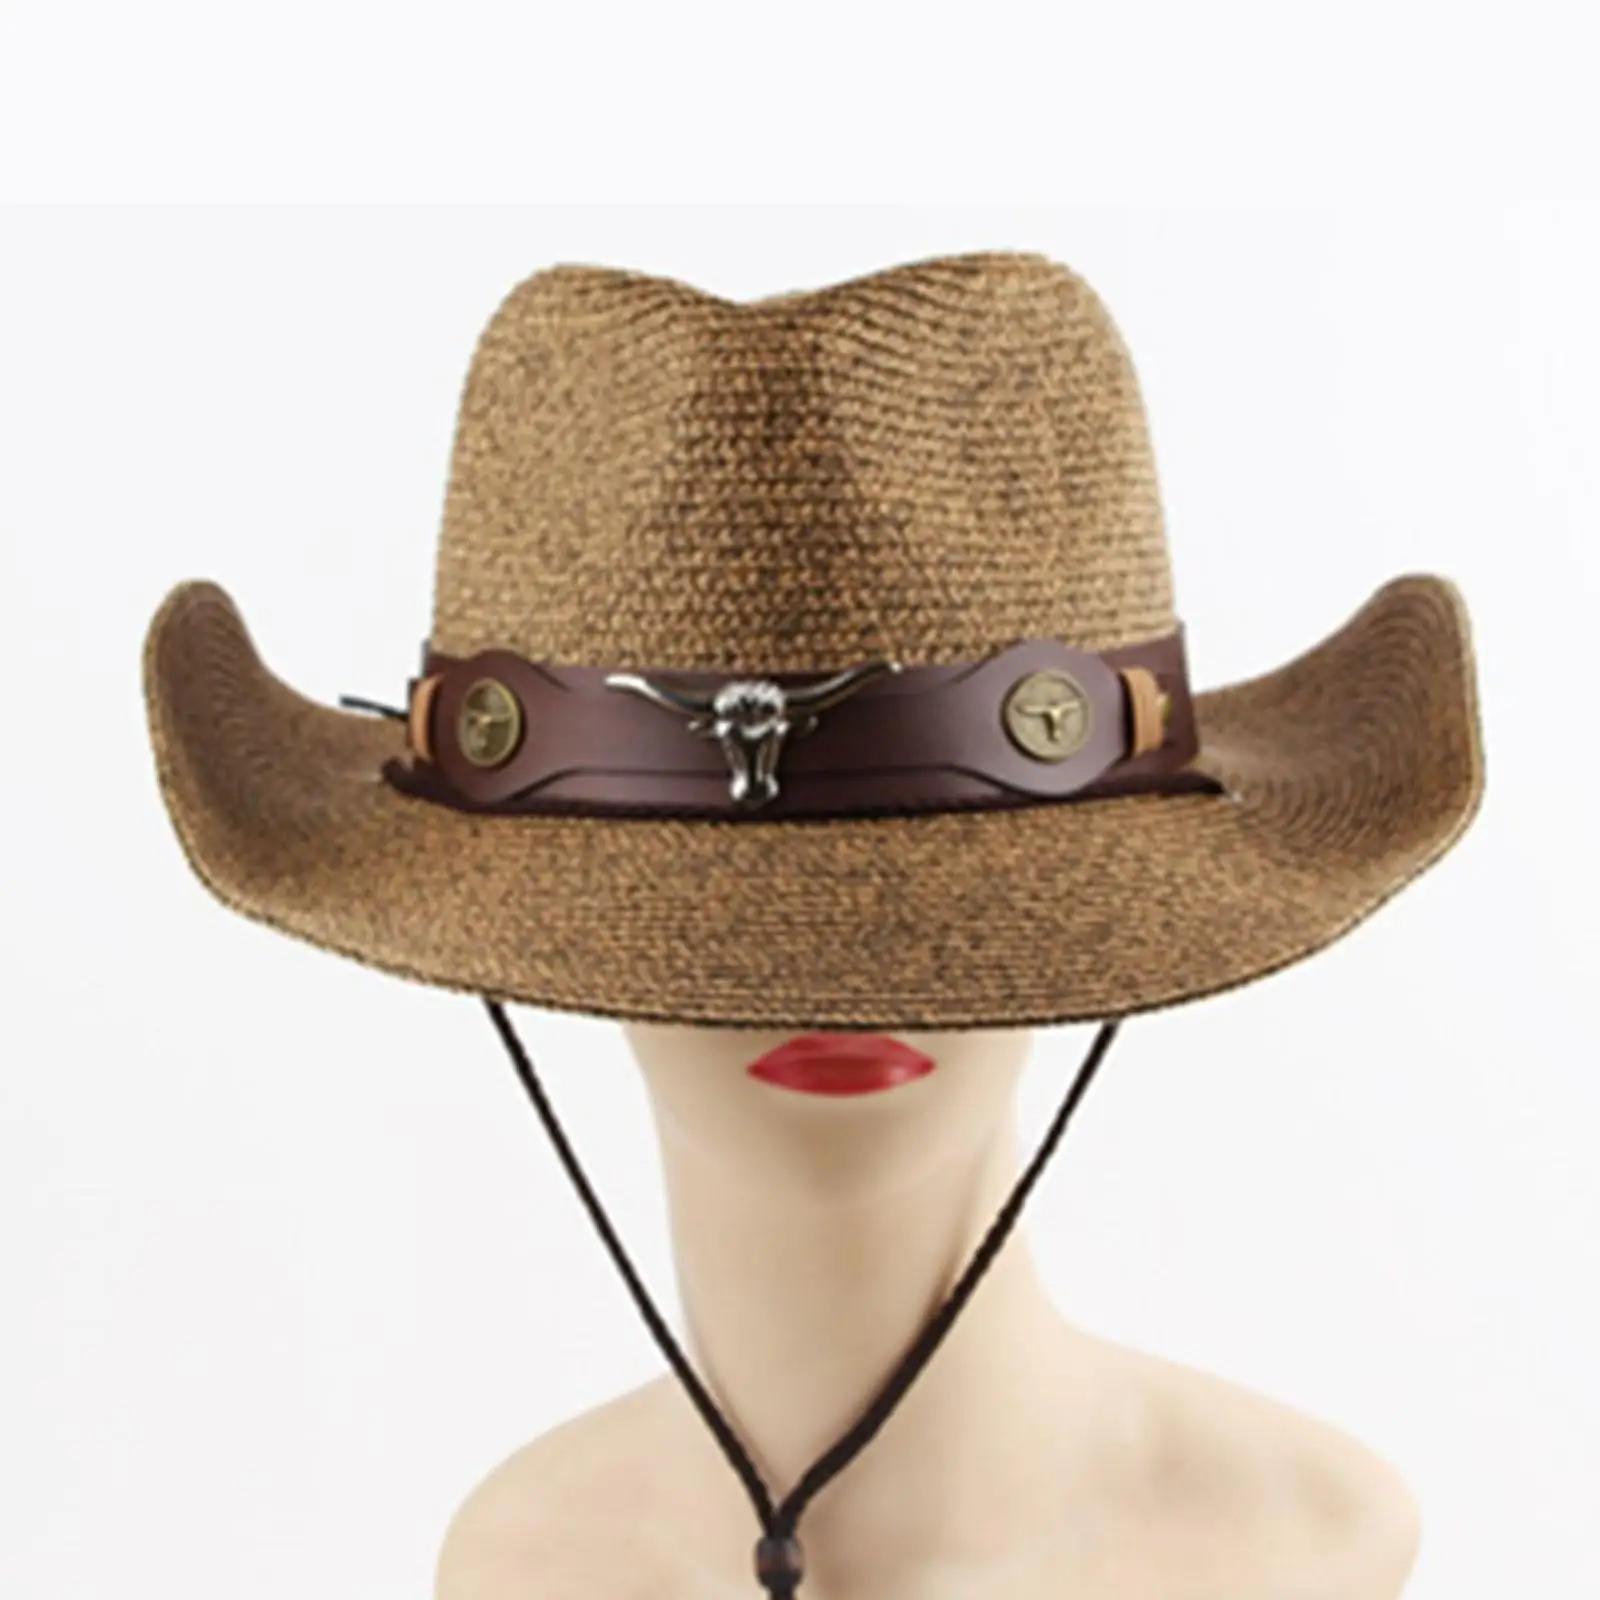 Straw Cowboy hat Sombreros Vagueros Roll up Brim Cowboy Hat Unisex Cowboy Hats for Outdoor Party Sun Protection Summer